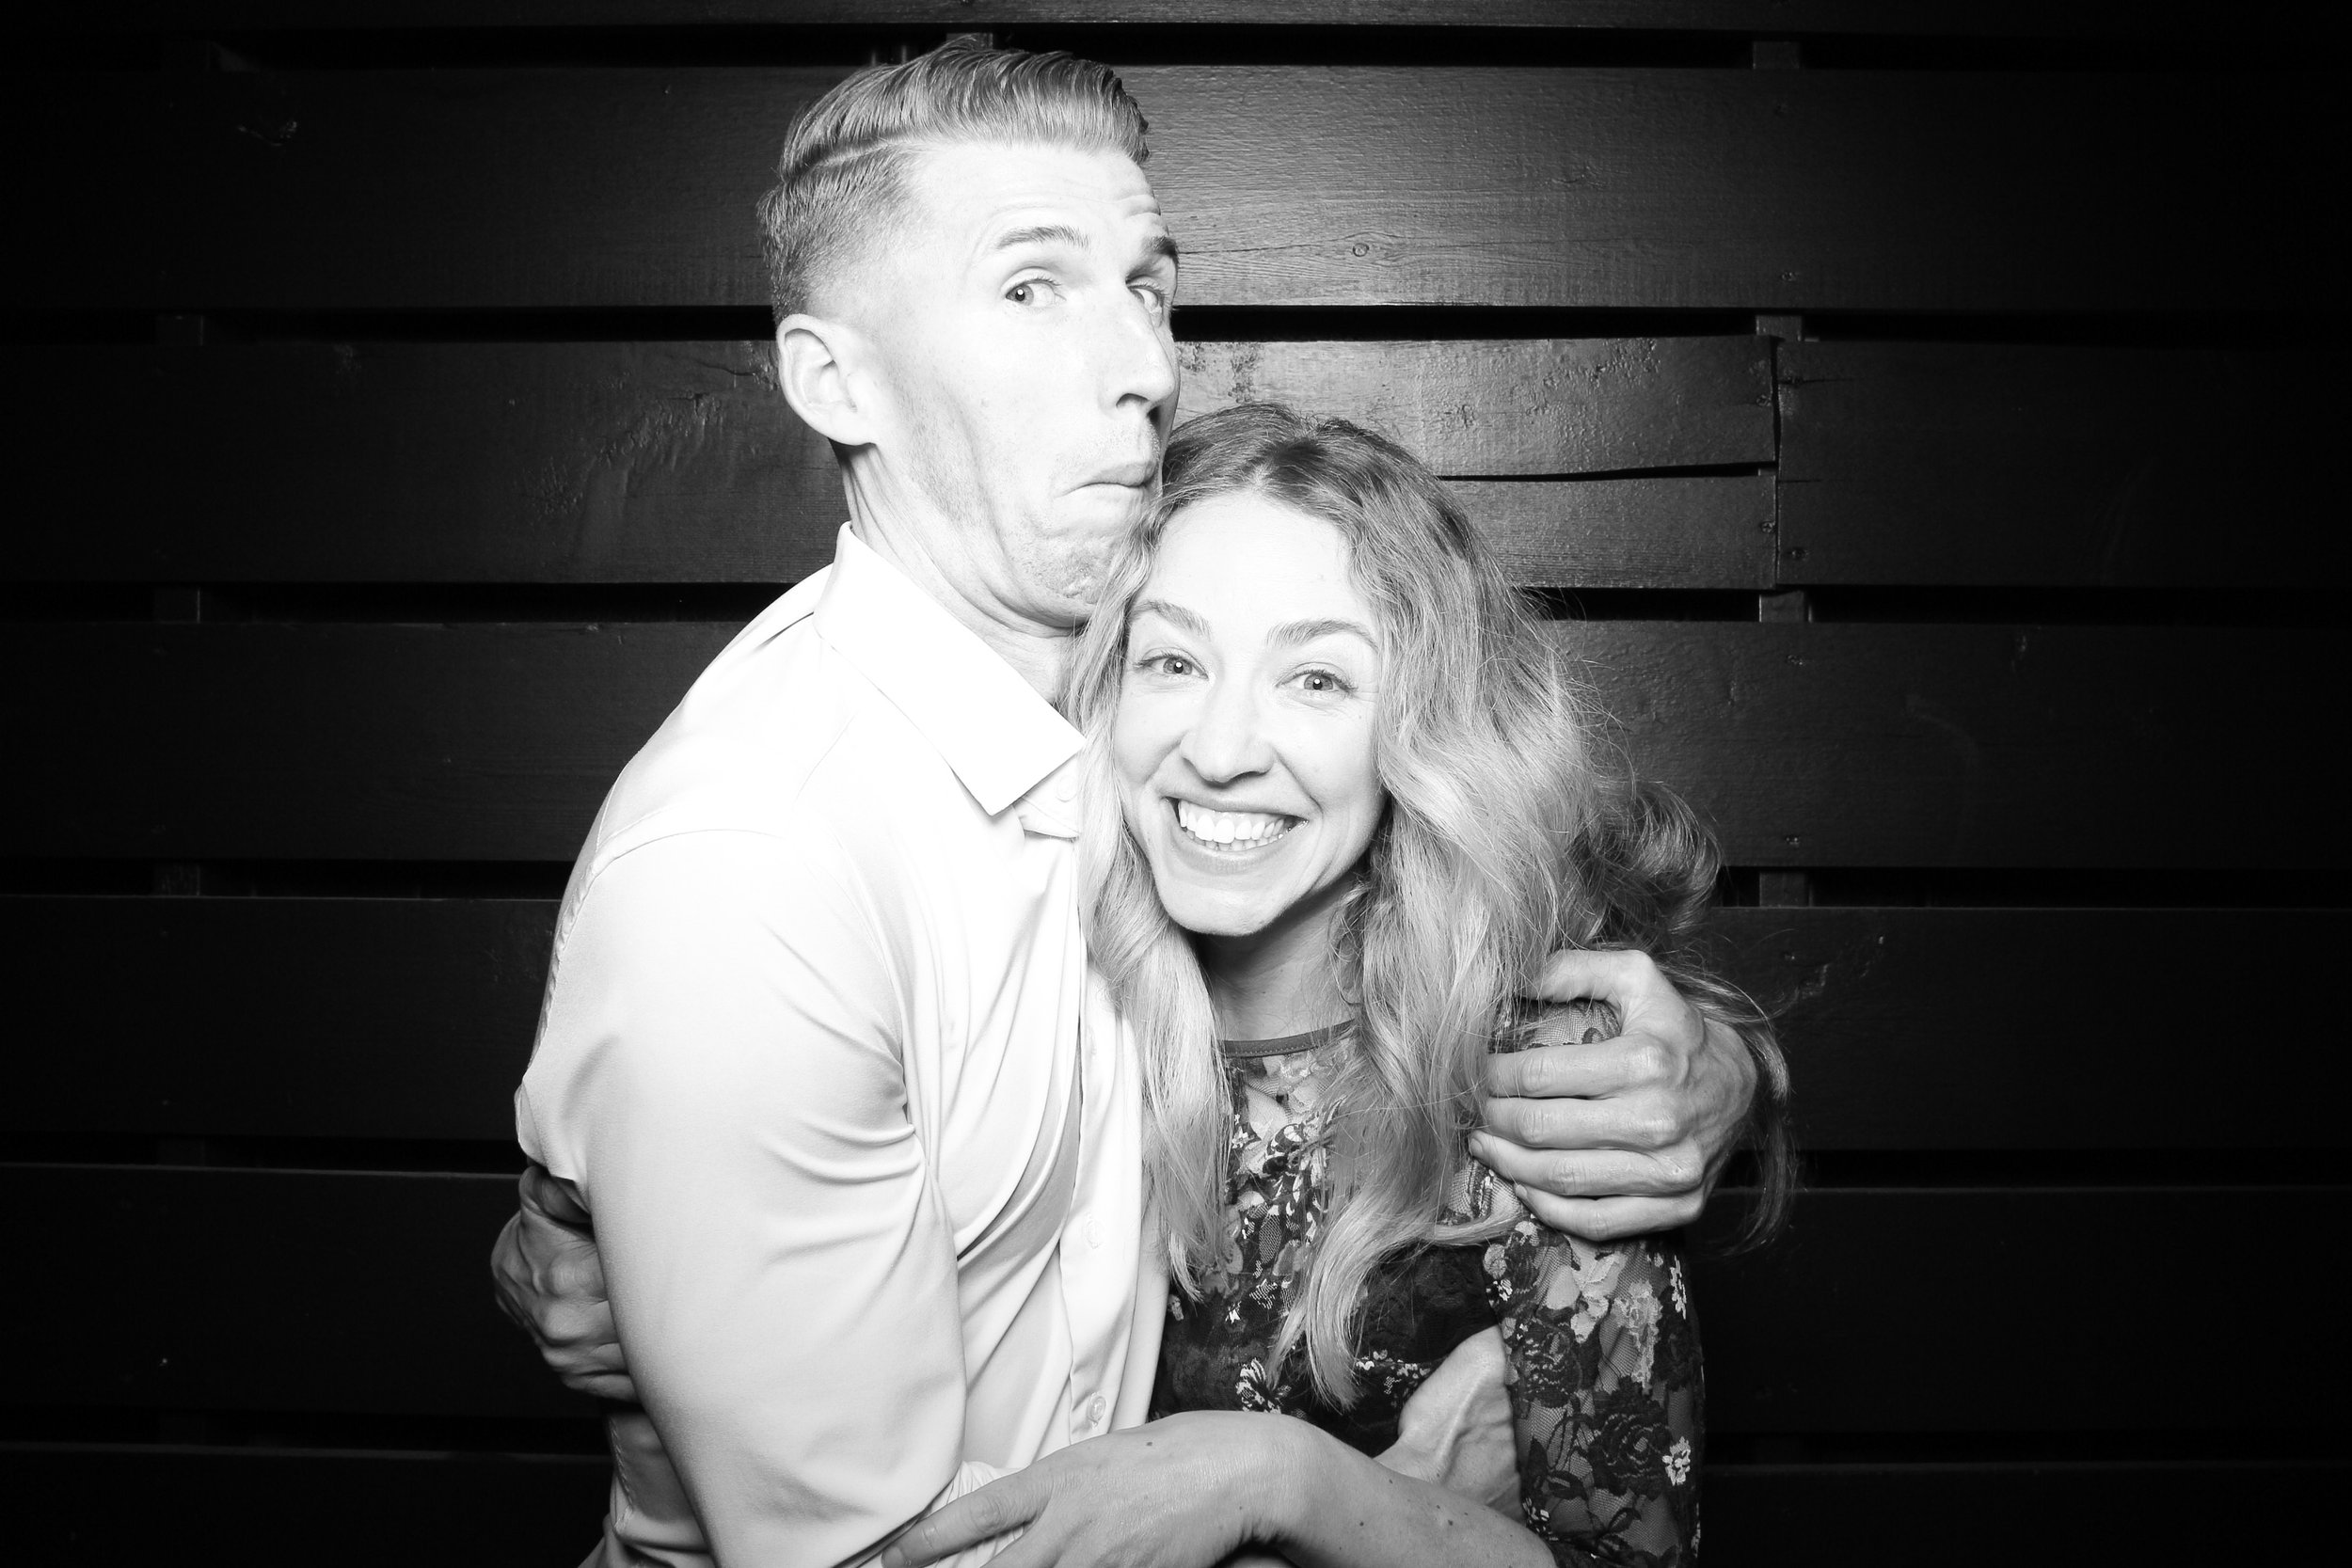 Fotio_Photo_Booth_Chicago_Winery_Clark_Street_Party_Family_Fun_Terrace_Superfans_River_North_10.jpg